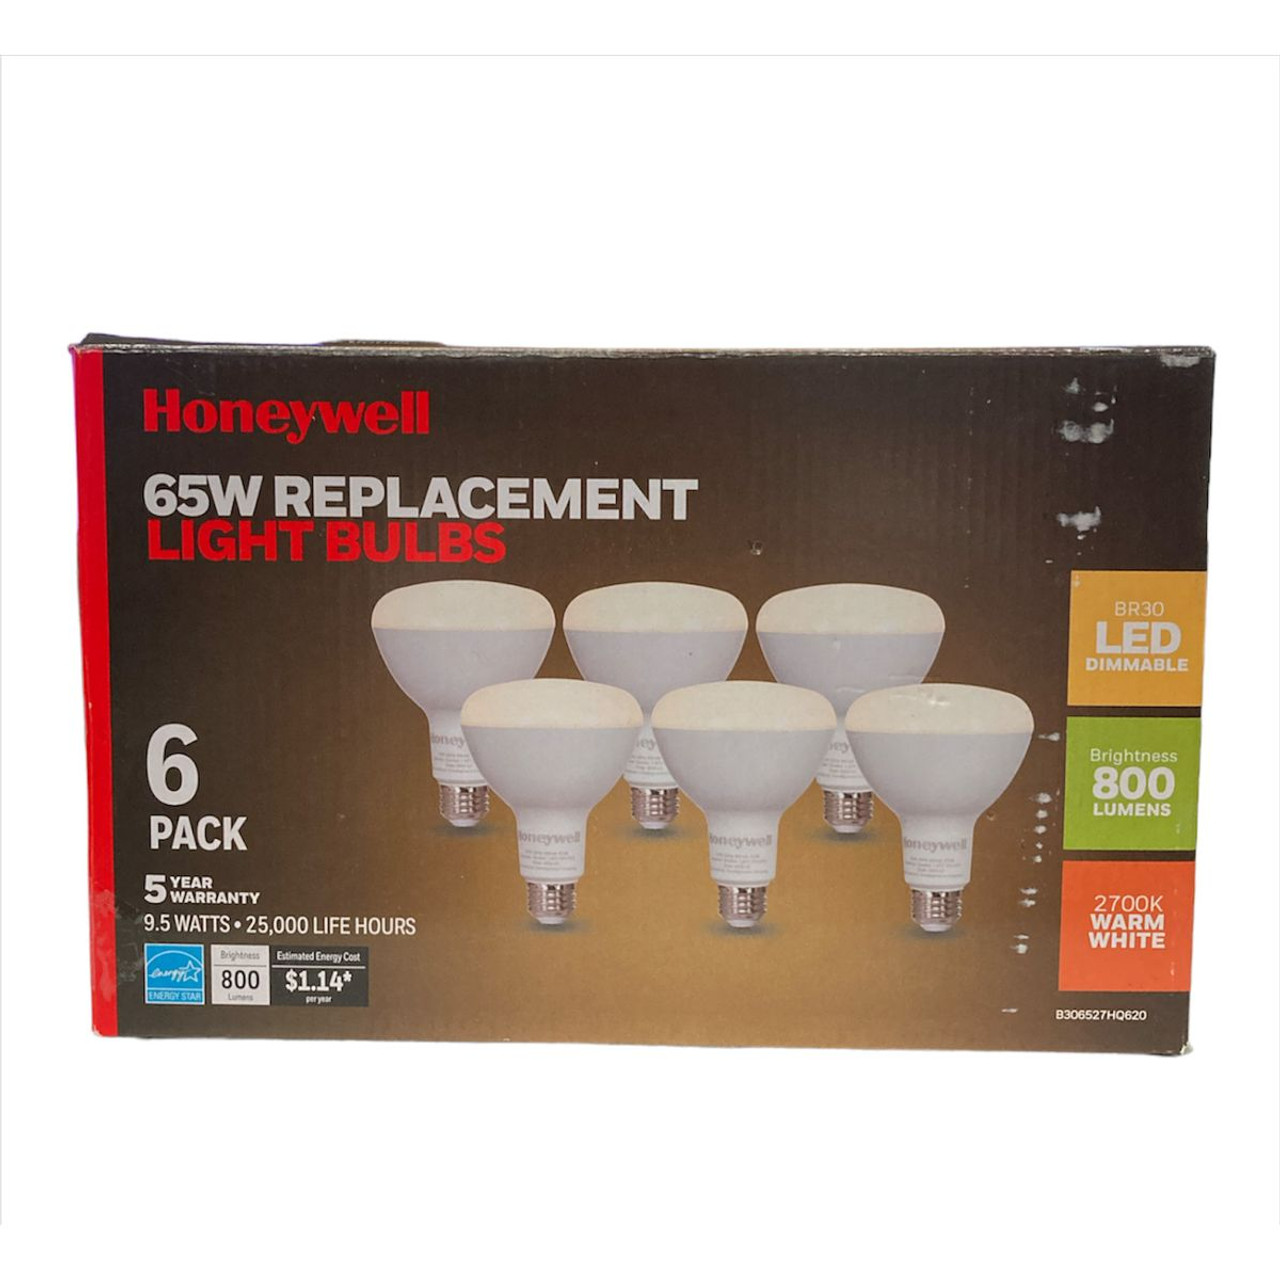 Honeywell Dimmable 800 Lumen BR30 LED Light Bulbs, Warm White (6-Pack) product image